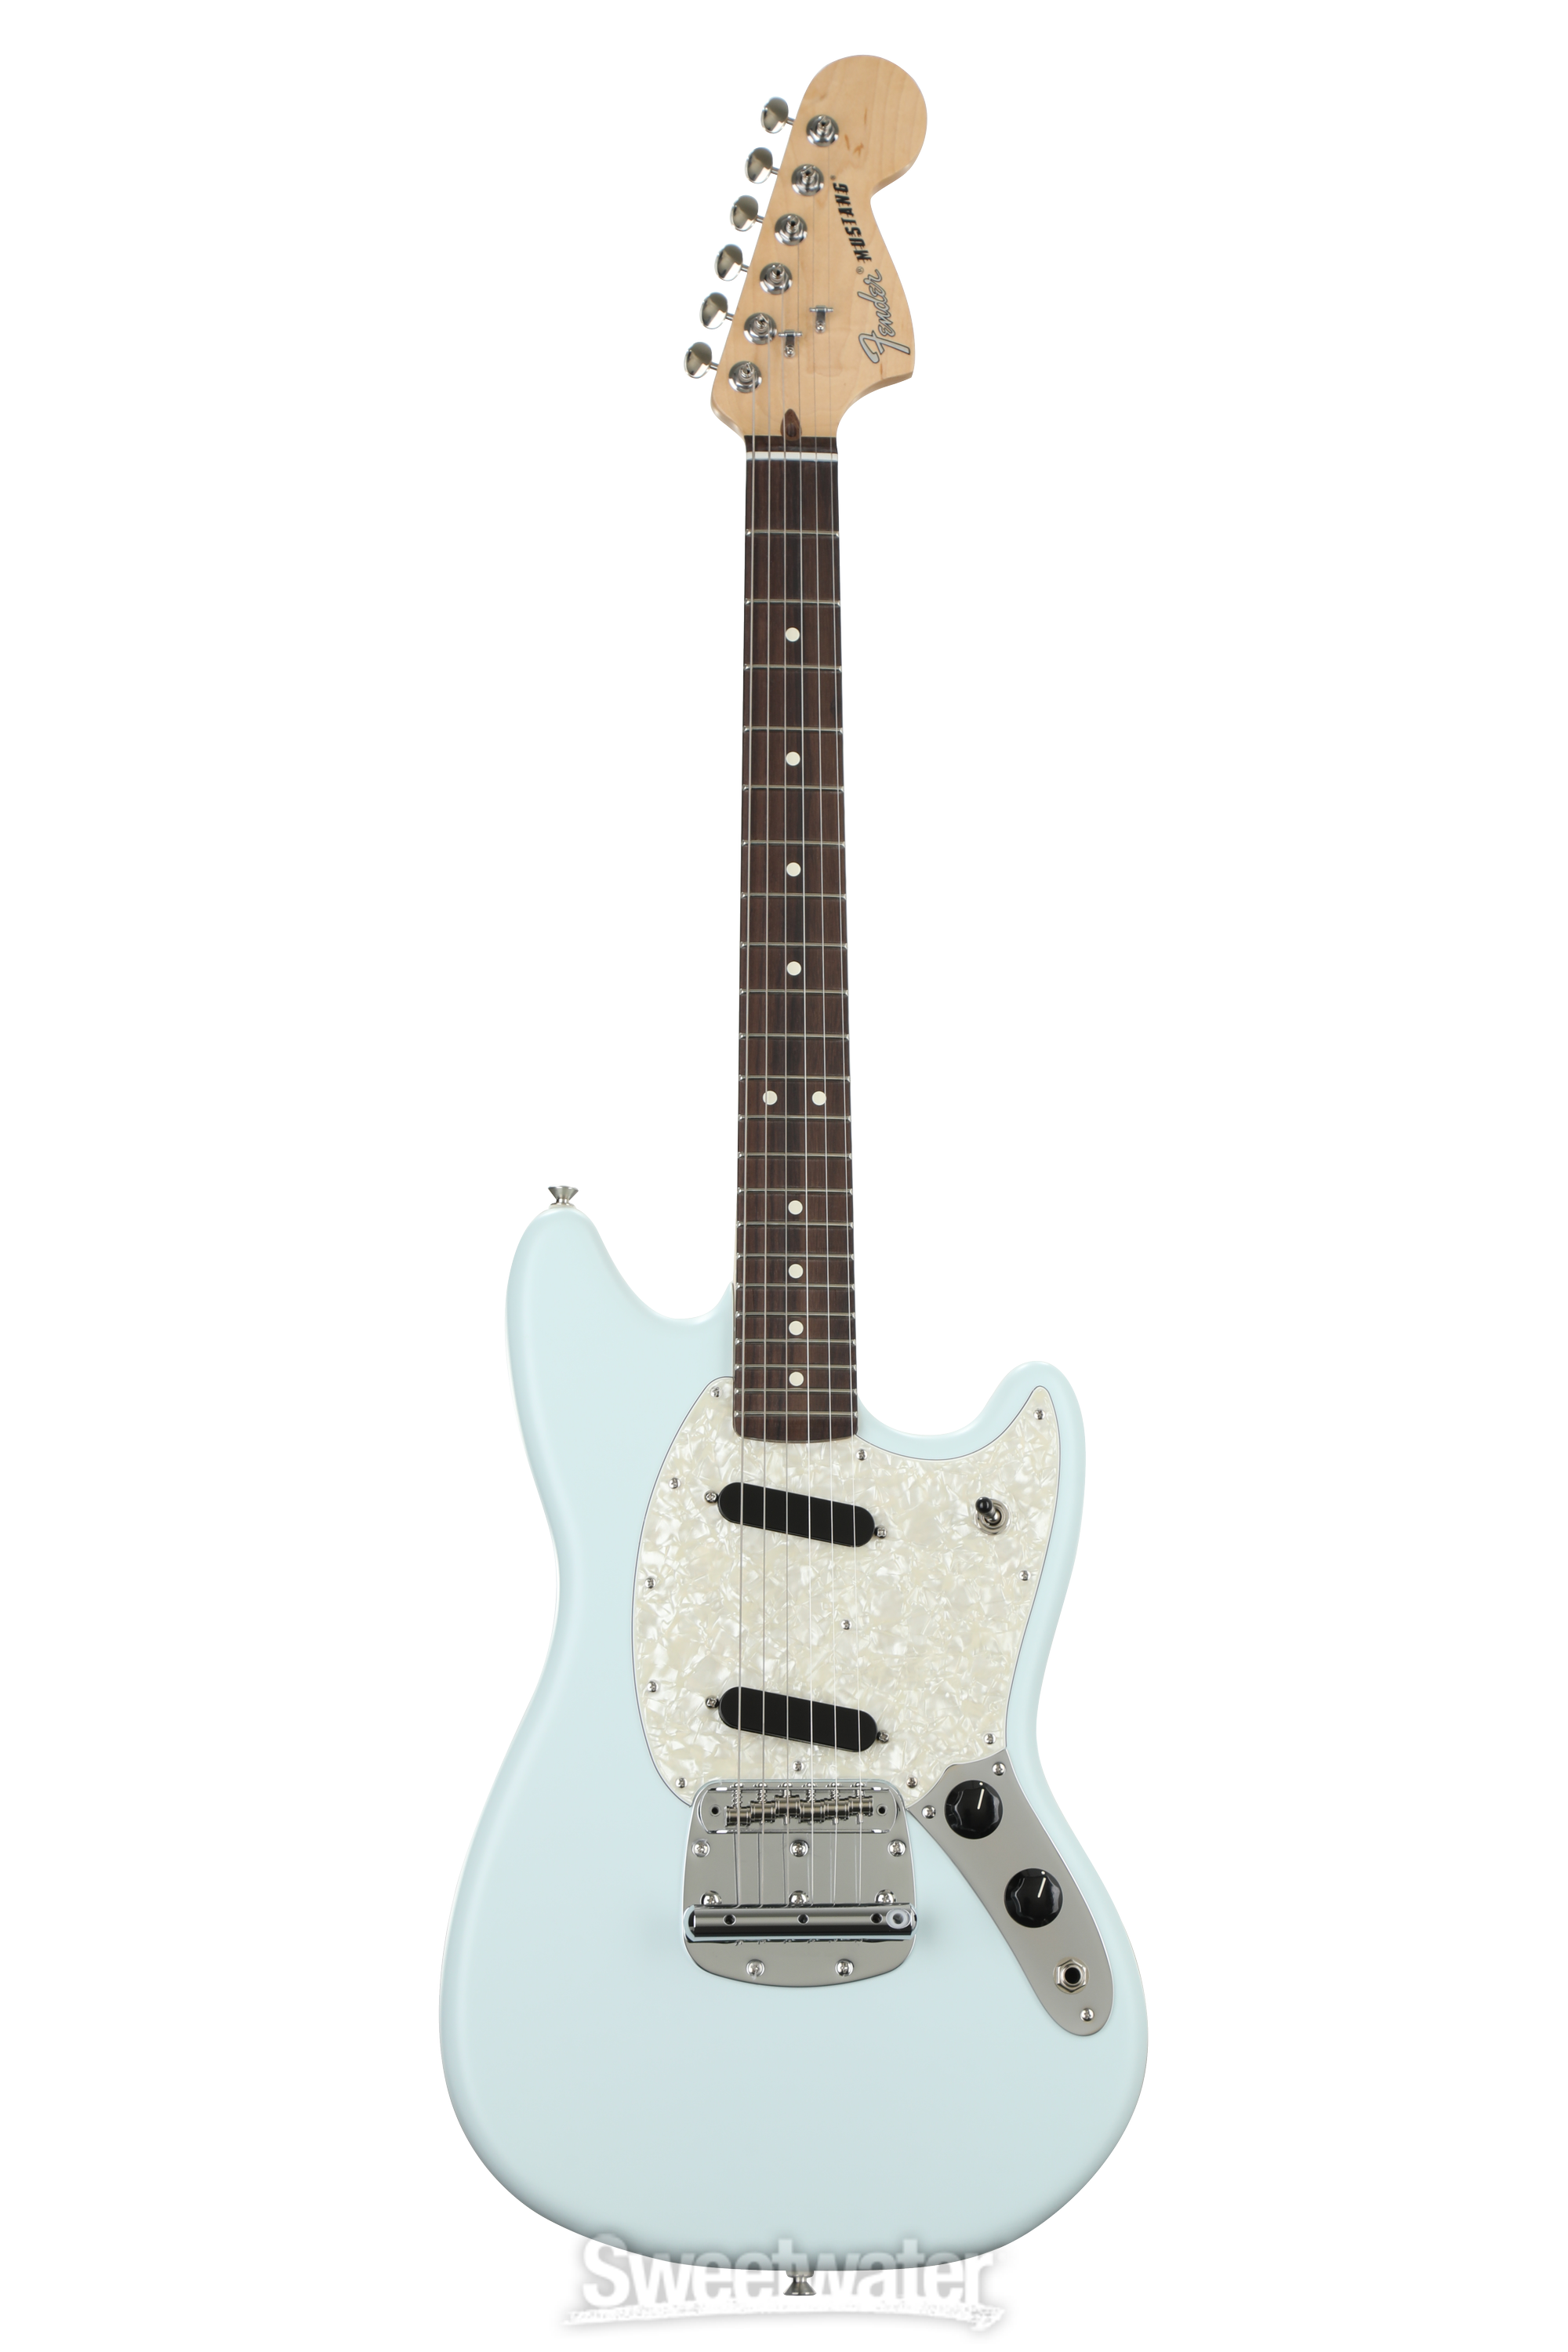 Fender American Performer Mustang - Satin Sonic Blue with Rosewood  Fingerboard | Sweetwater